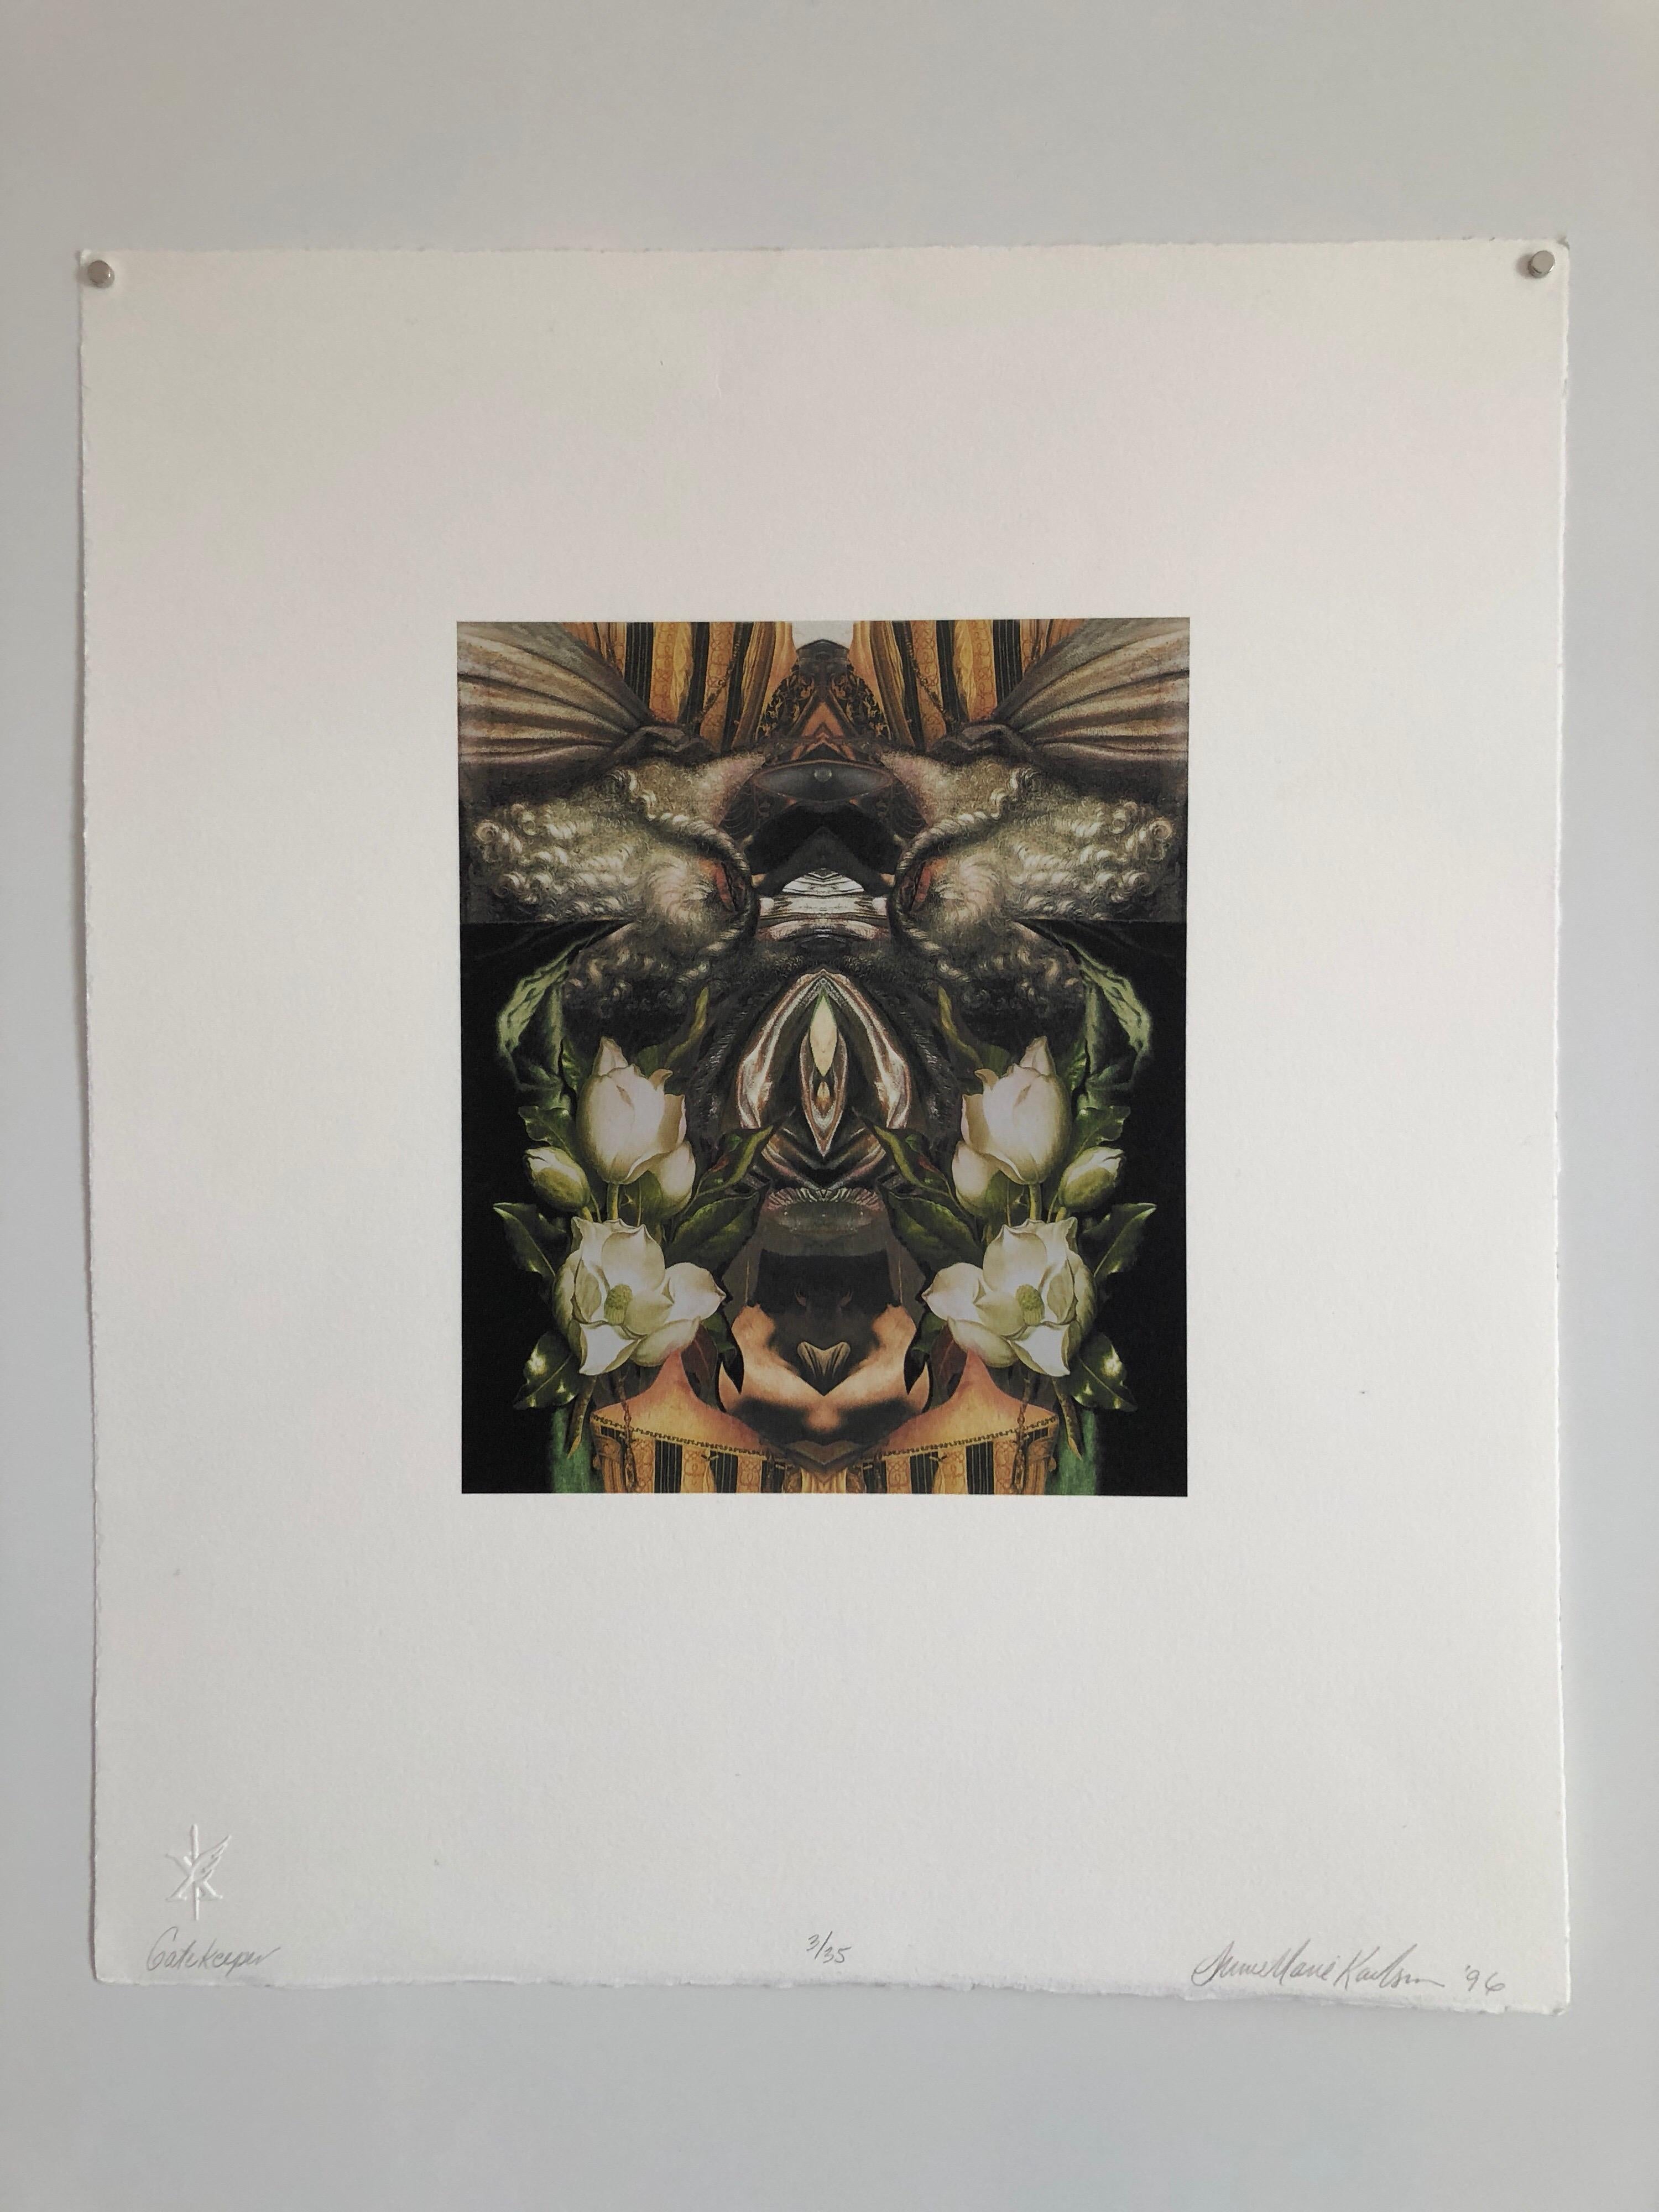 GATEKEEPER, 1996, color Iris print, signed in pencil, from the numbered edition 35,
This is 5/35 (the picture shows 3/35)
 image 9 x 7 ½